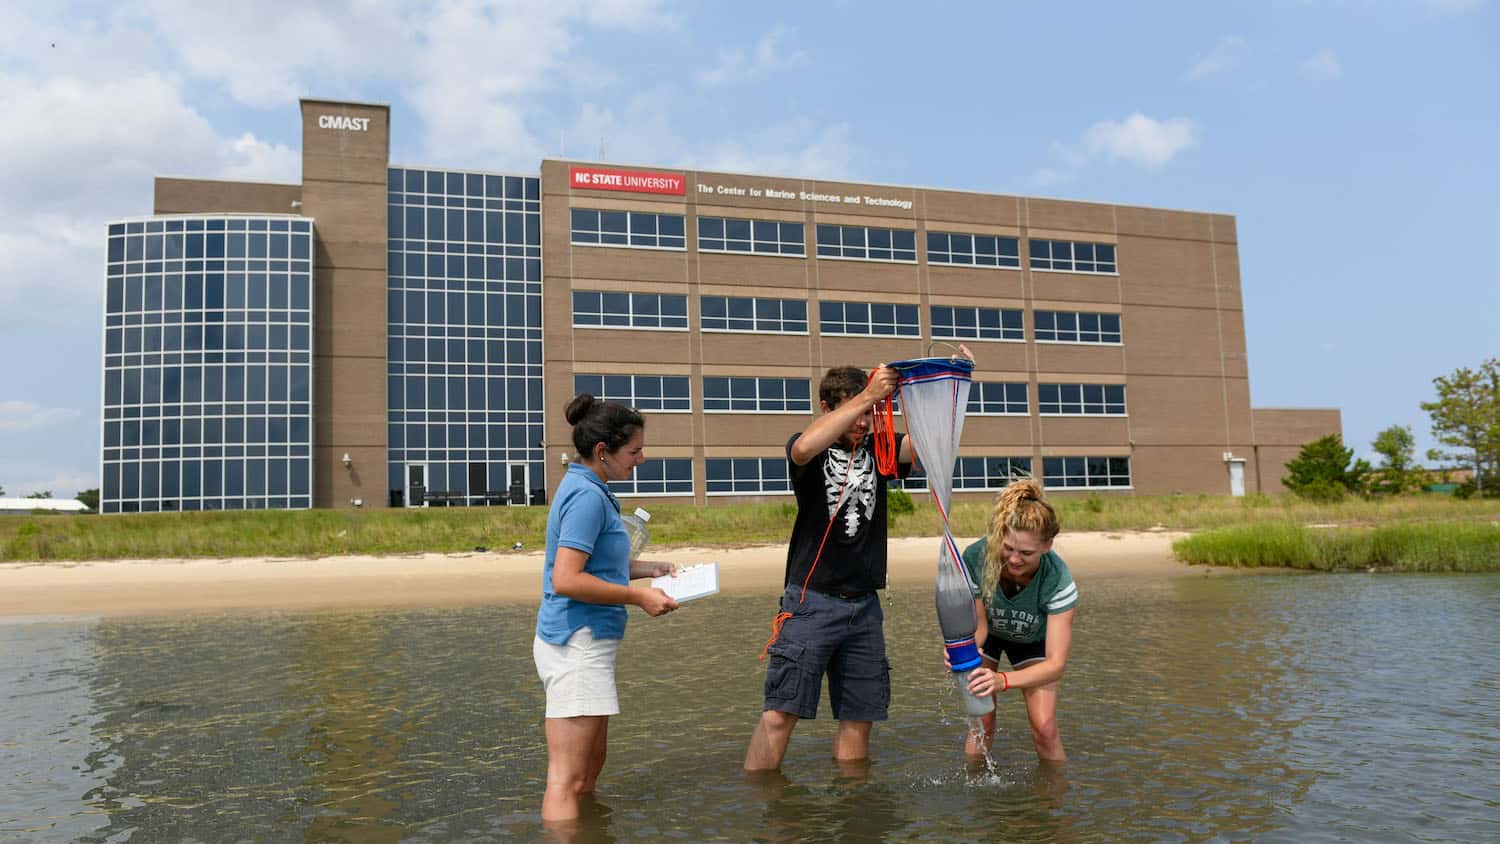 Researchers collect plankton in knee-deep water with the CMAST building in the background